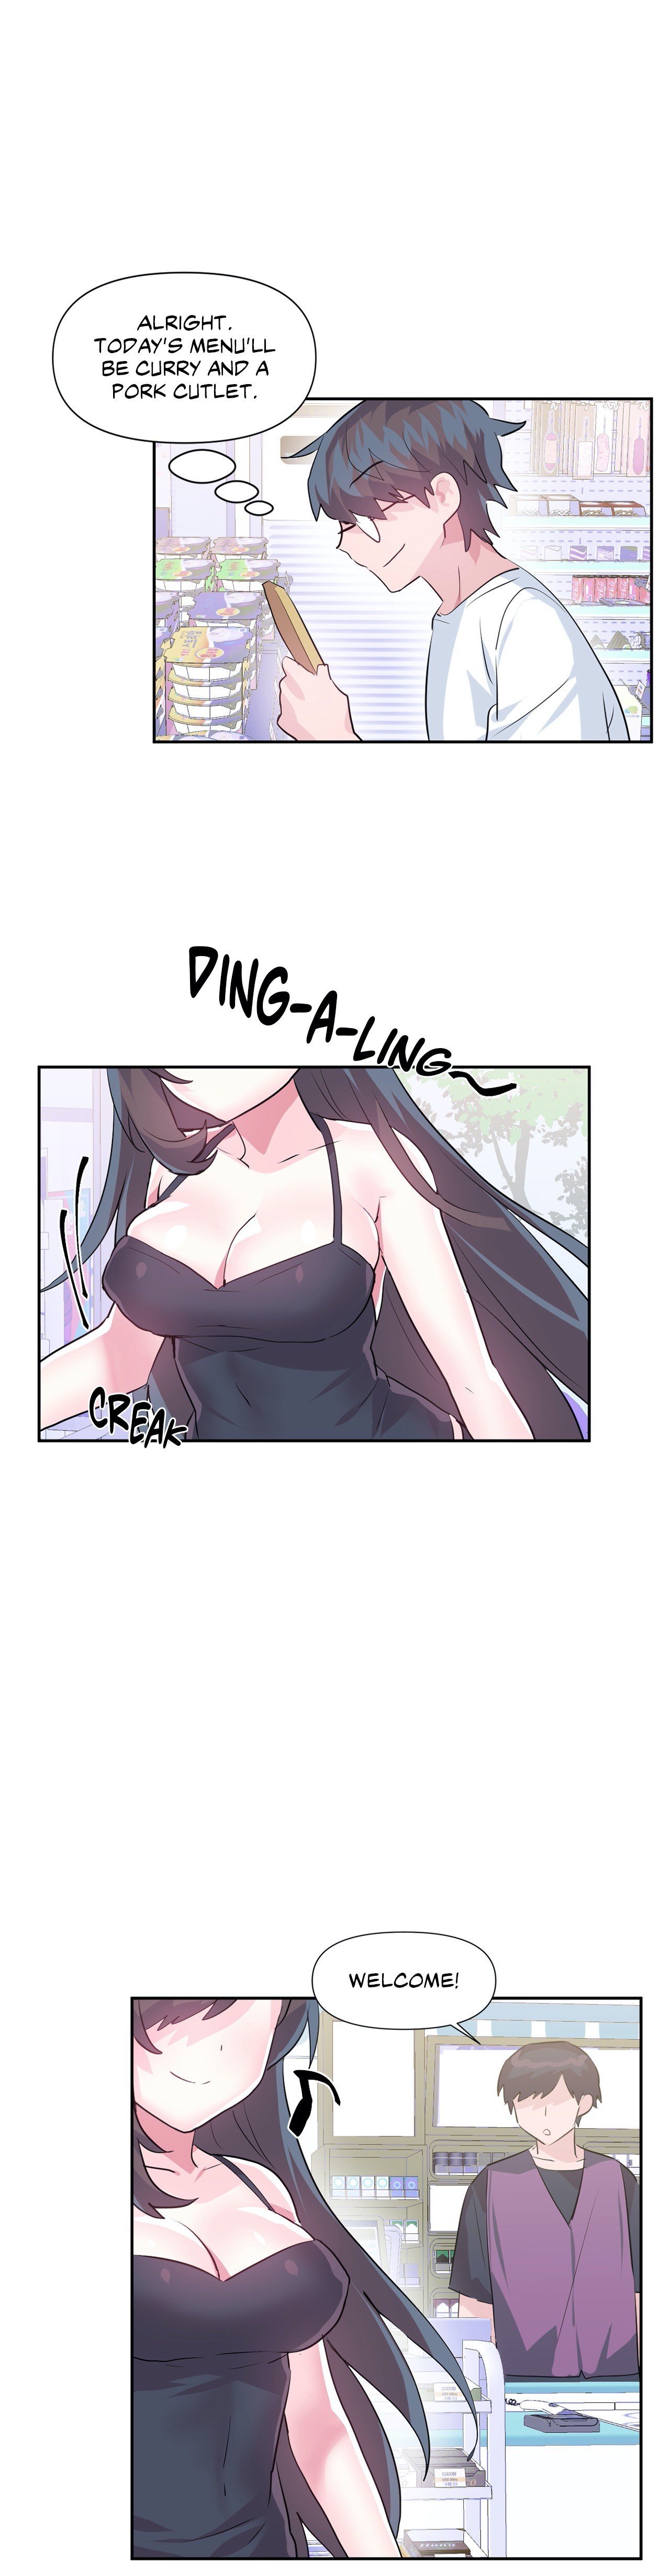 log-in-to-lust-a-land-chap-33-5